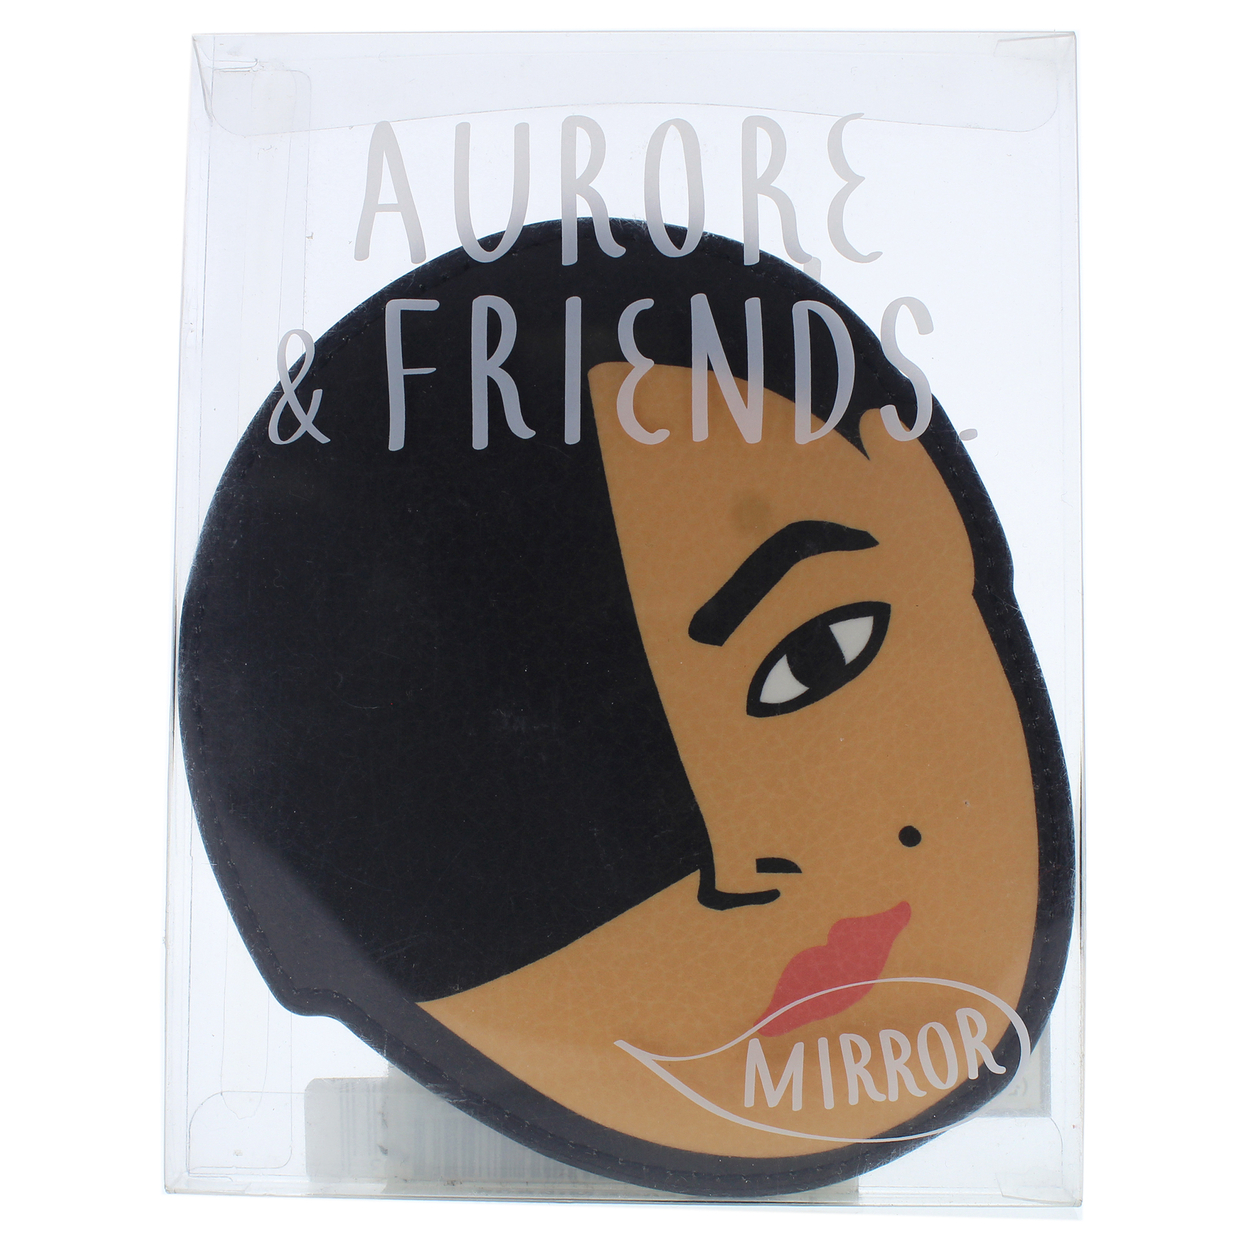 Ooh Lala Aurore And Friends Hand Mirror - Black 1 Pc